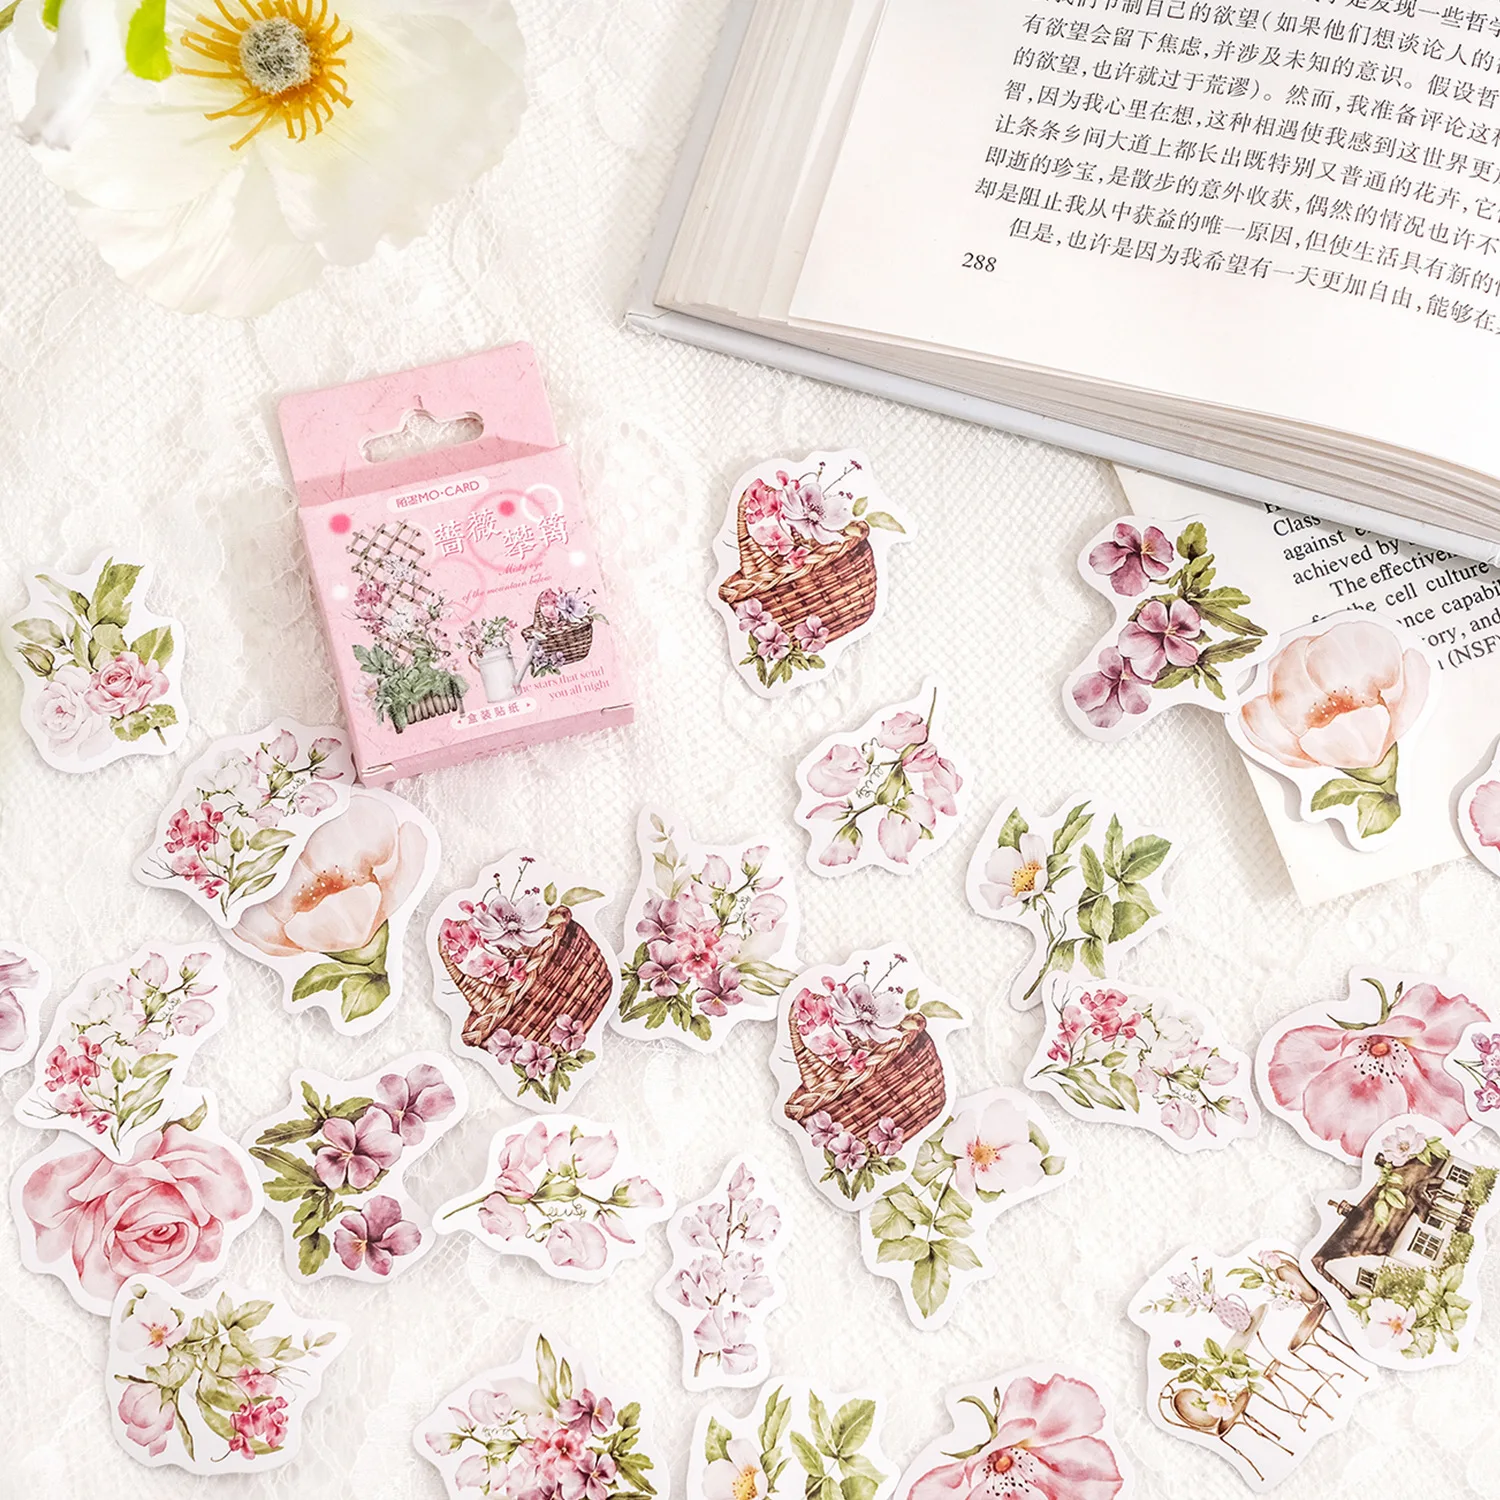 

46pcs/Box Fresh Rose Boxed Stickers Decorative for Scrapbooking DIY Hand Account Diary Album Stationery Journal Planner